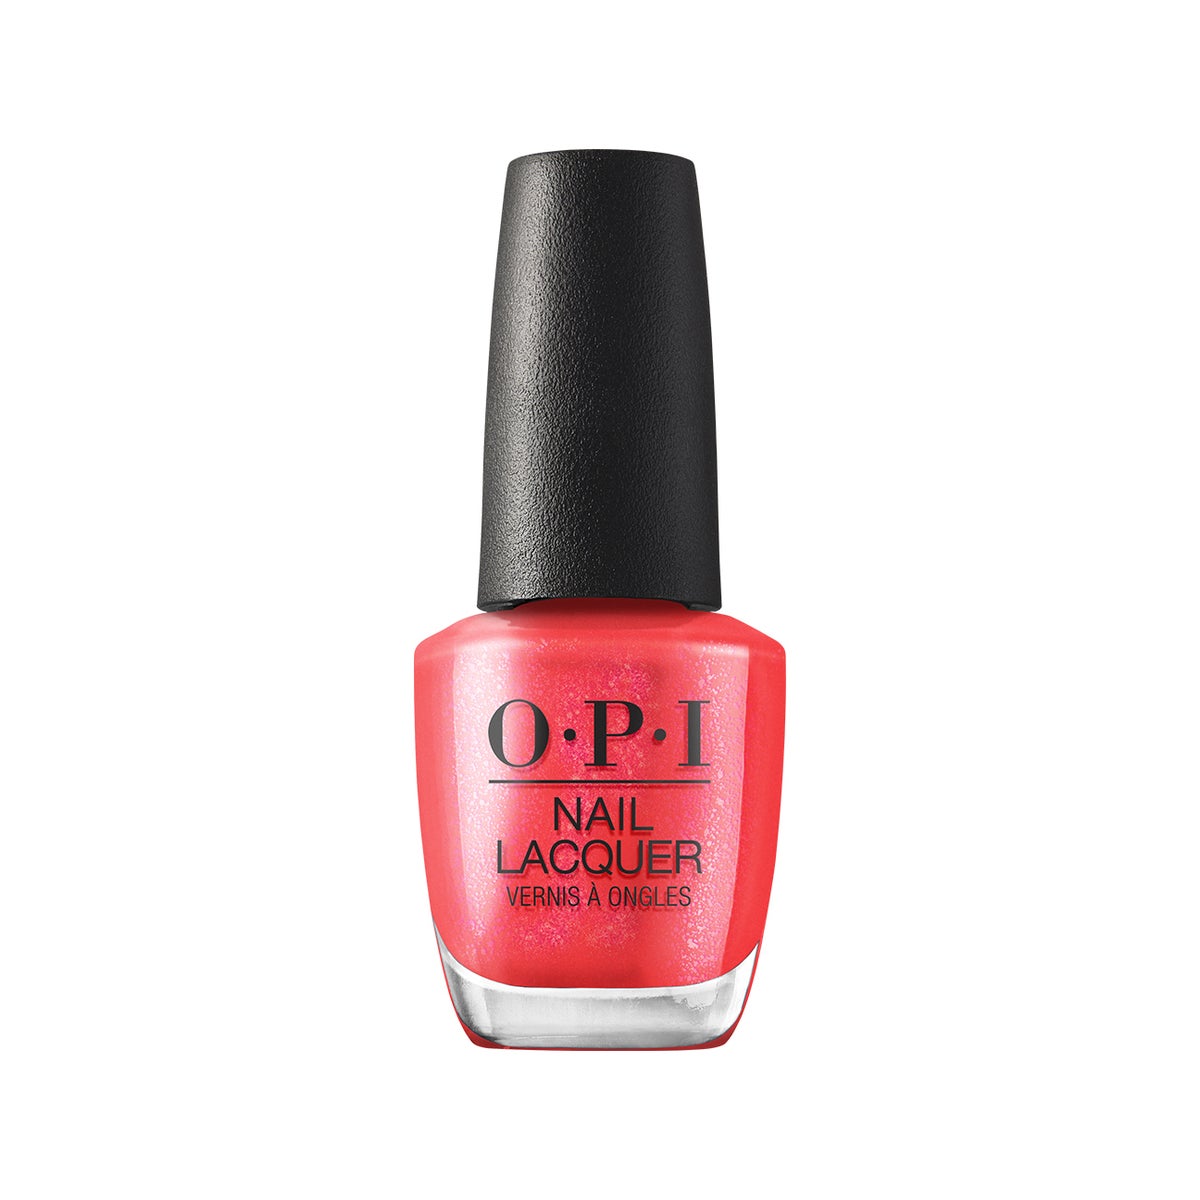 Left Your Texts On Red - OPI Nail Lacquer